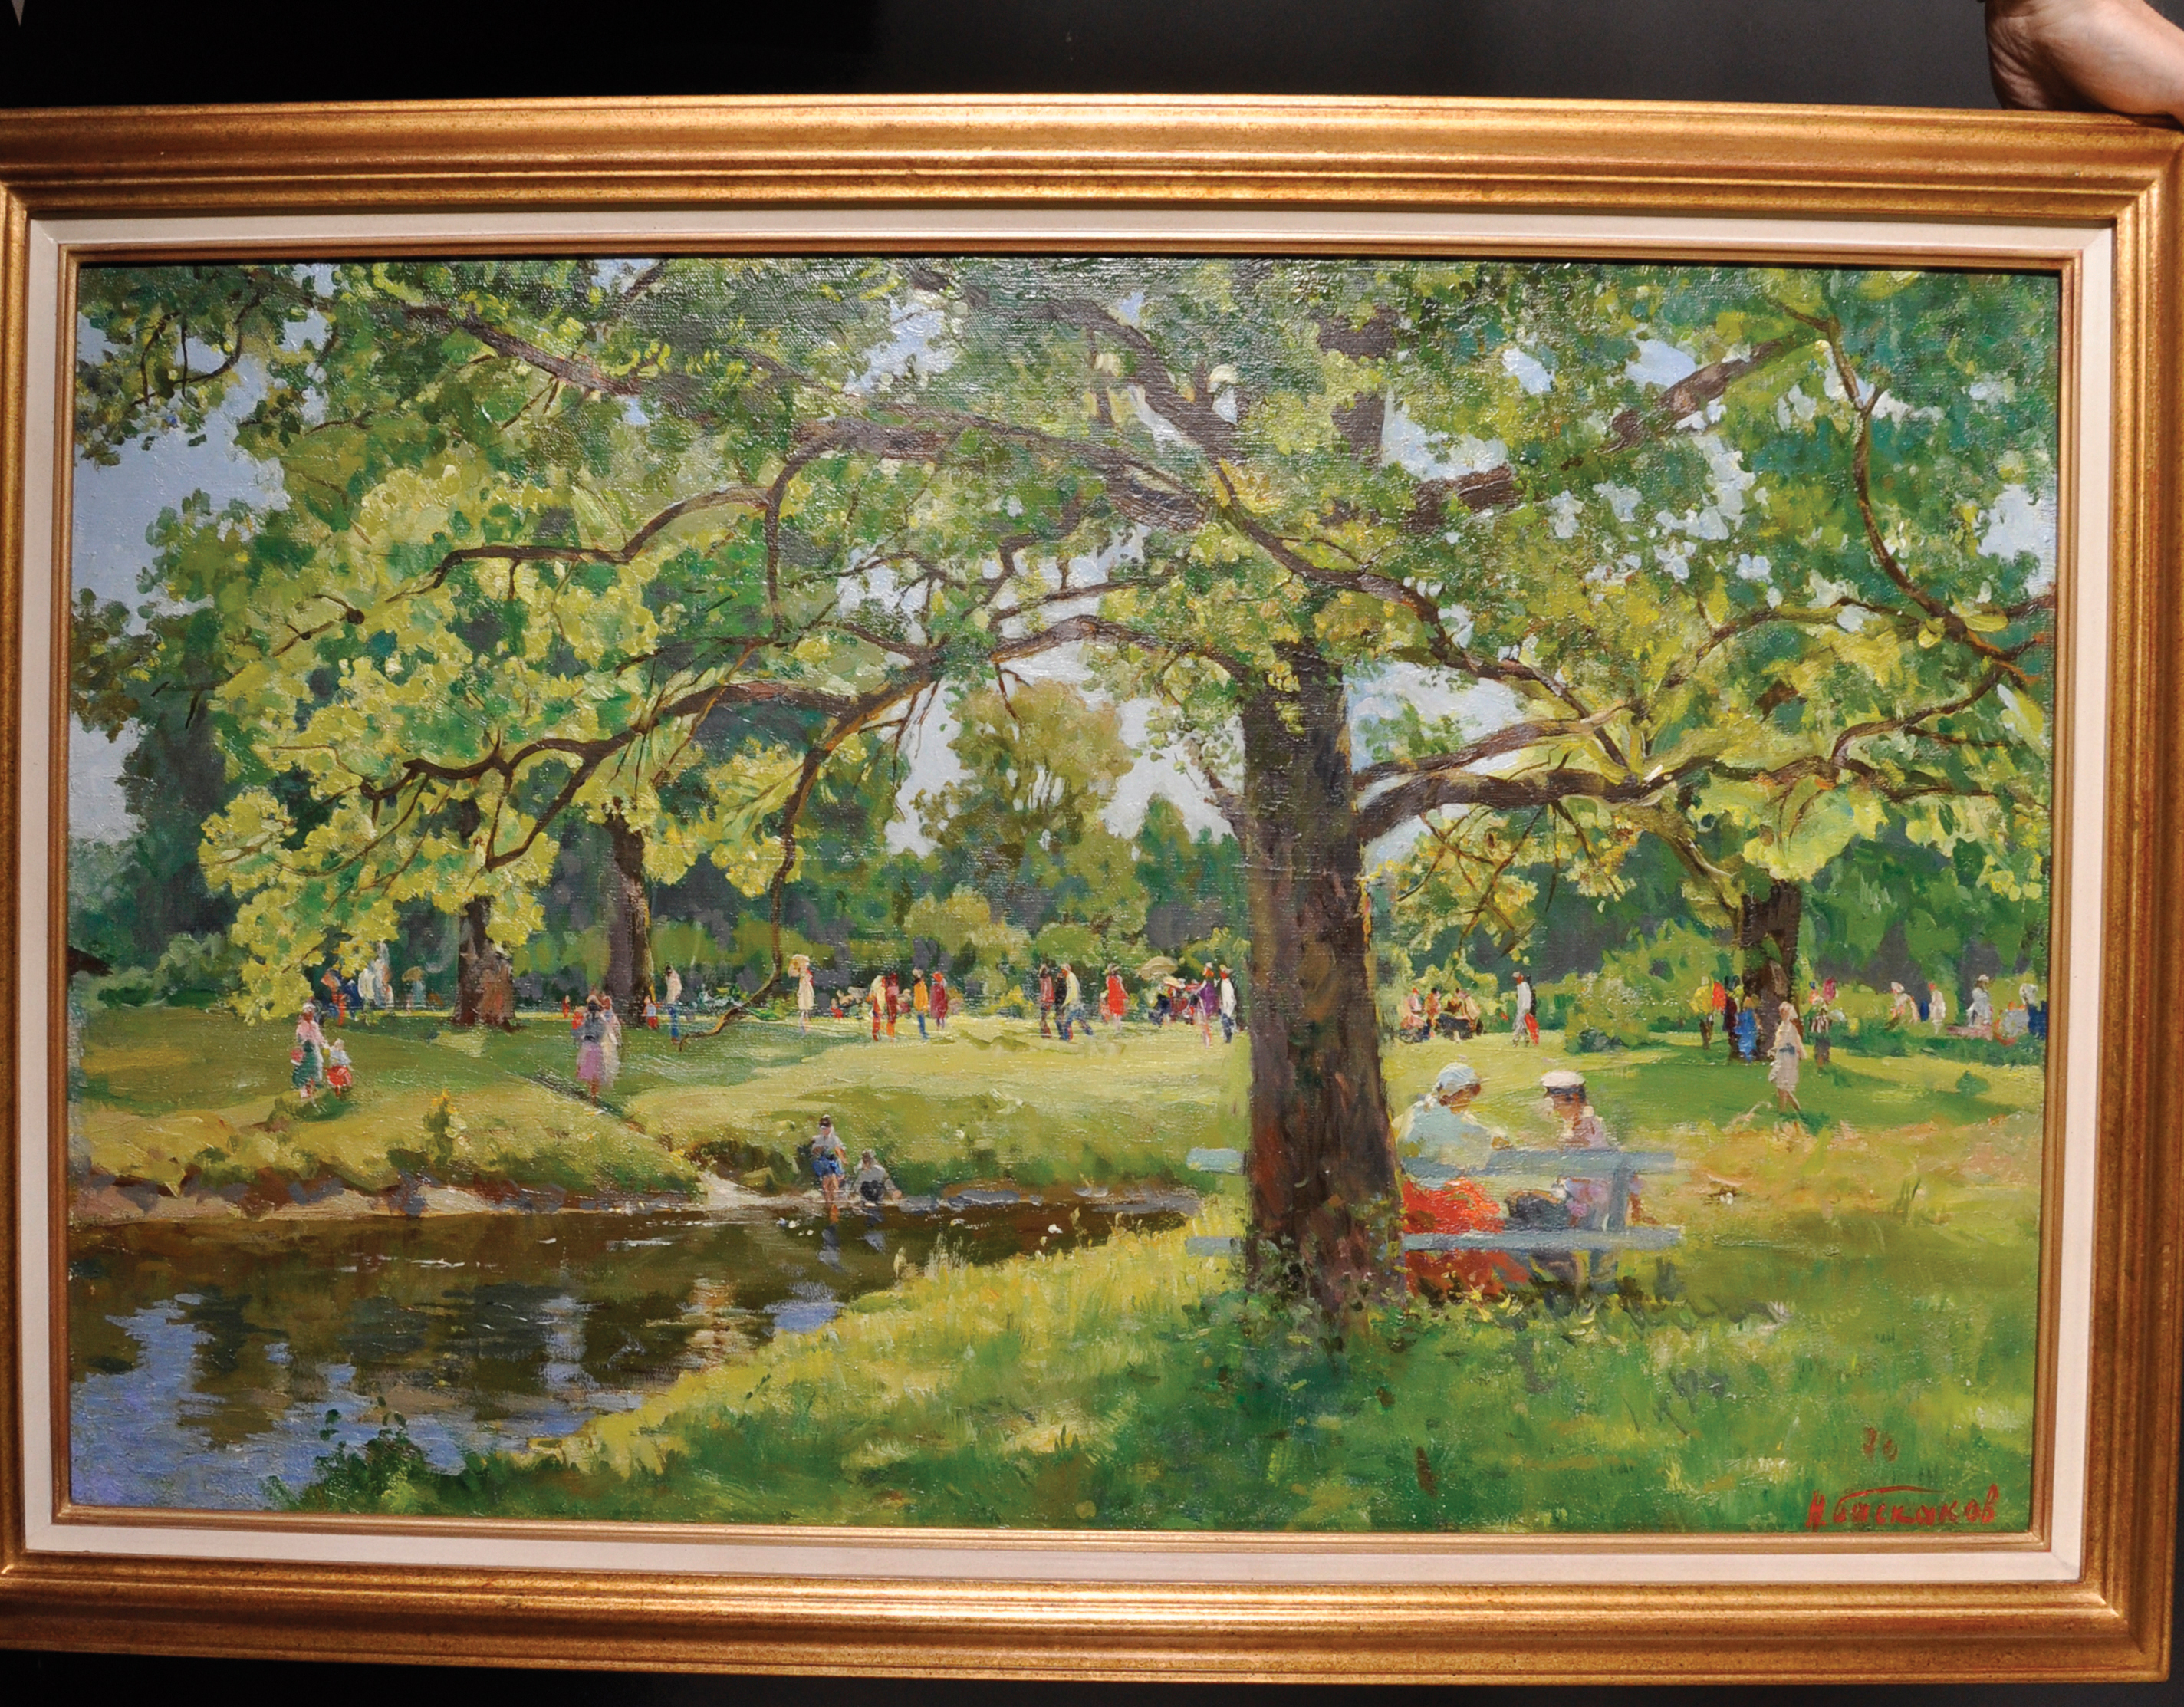 Nikolai Nikolaevitch Baskakov (1918-1993) Russian. "In the Park", with Figures by a River Bank, - Image 2 of 5